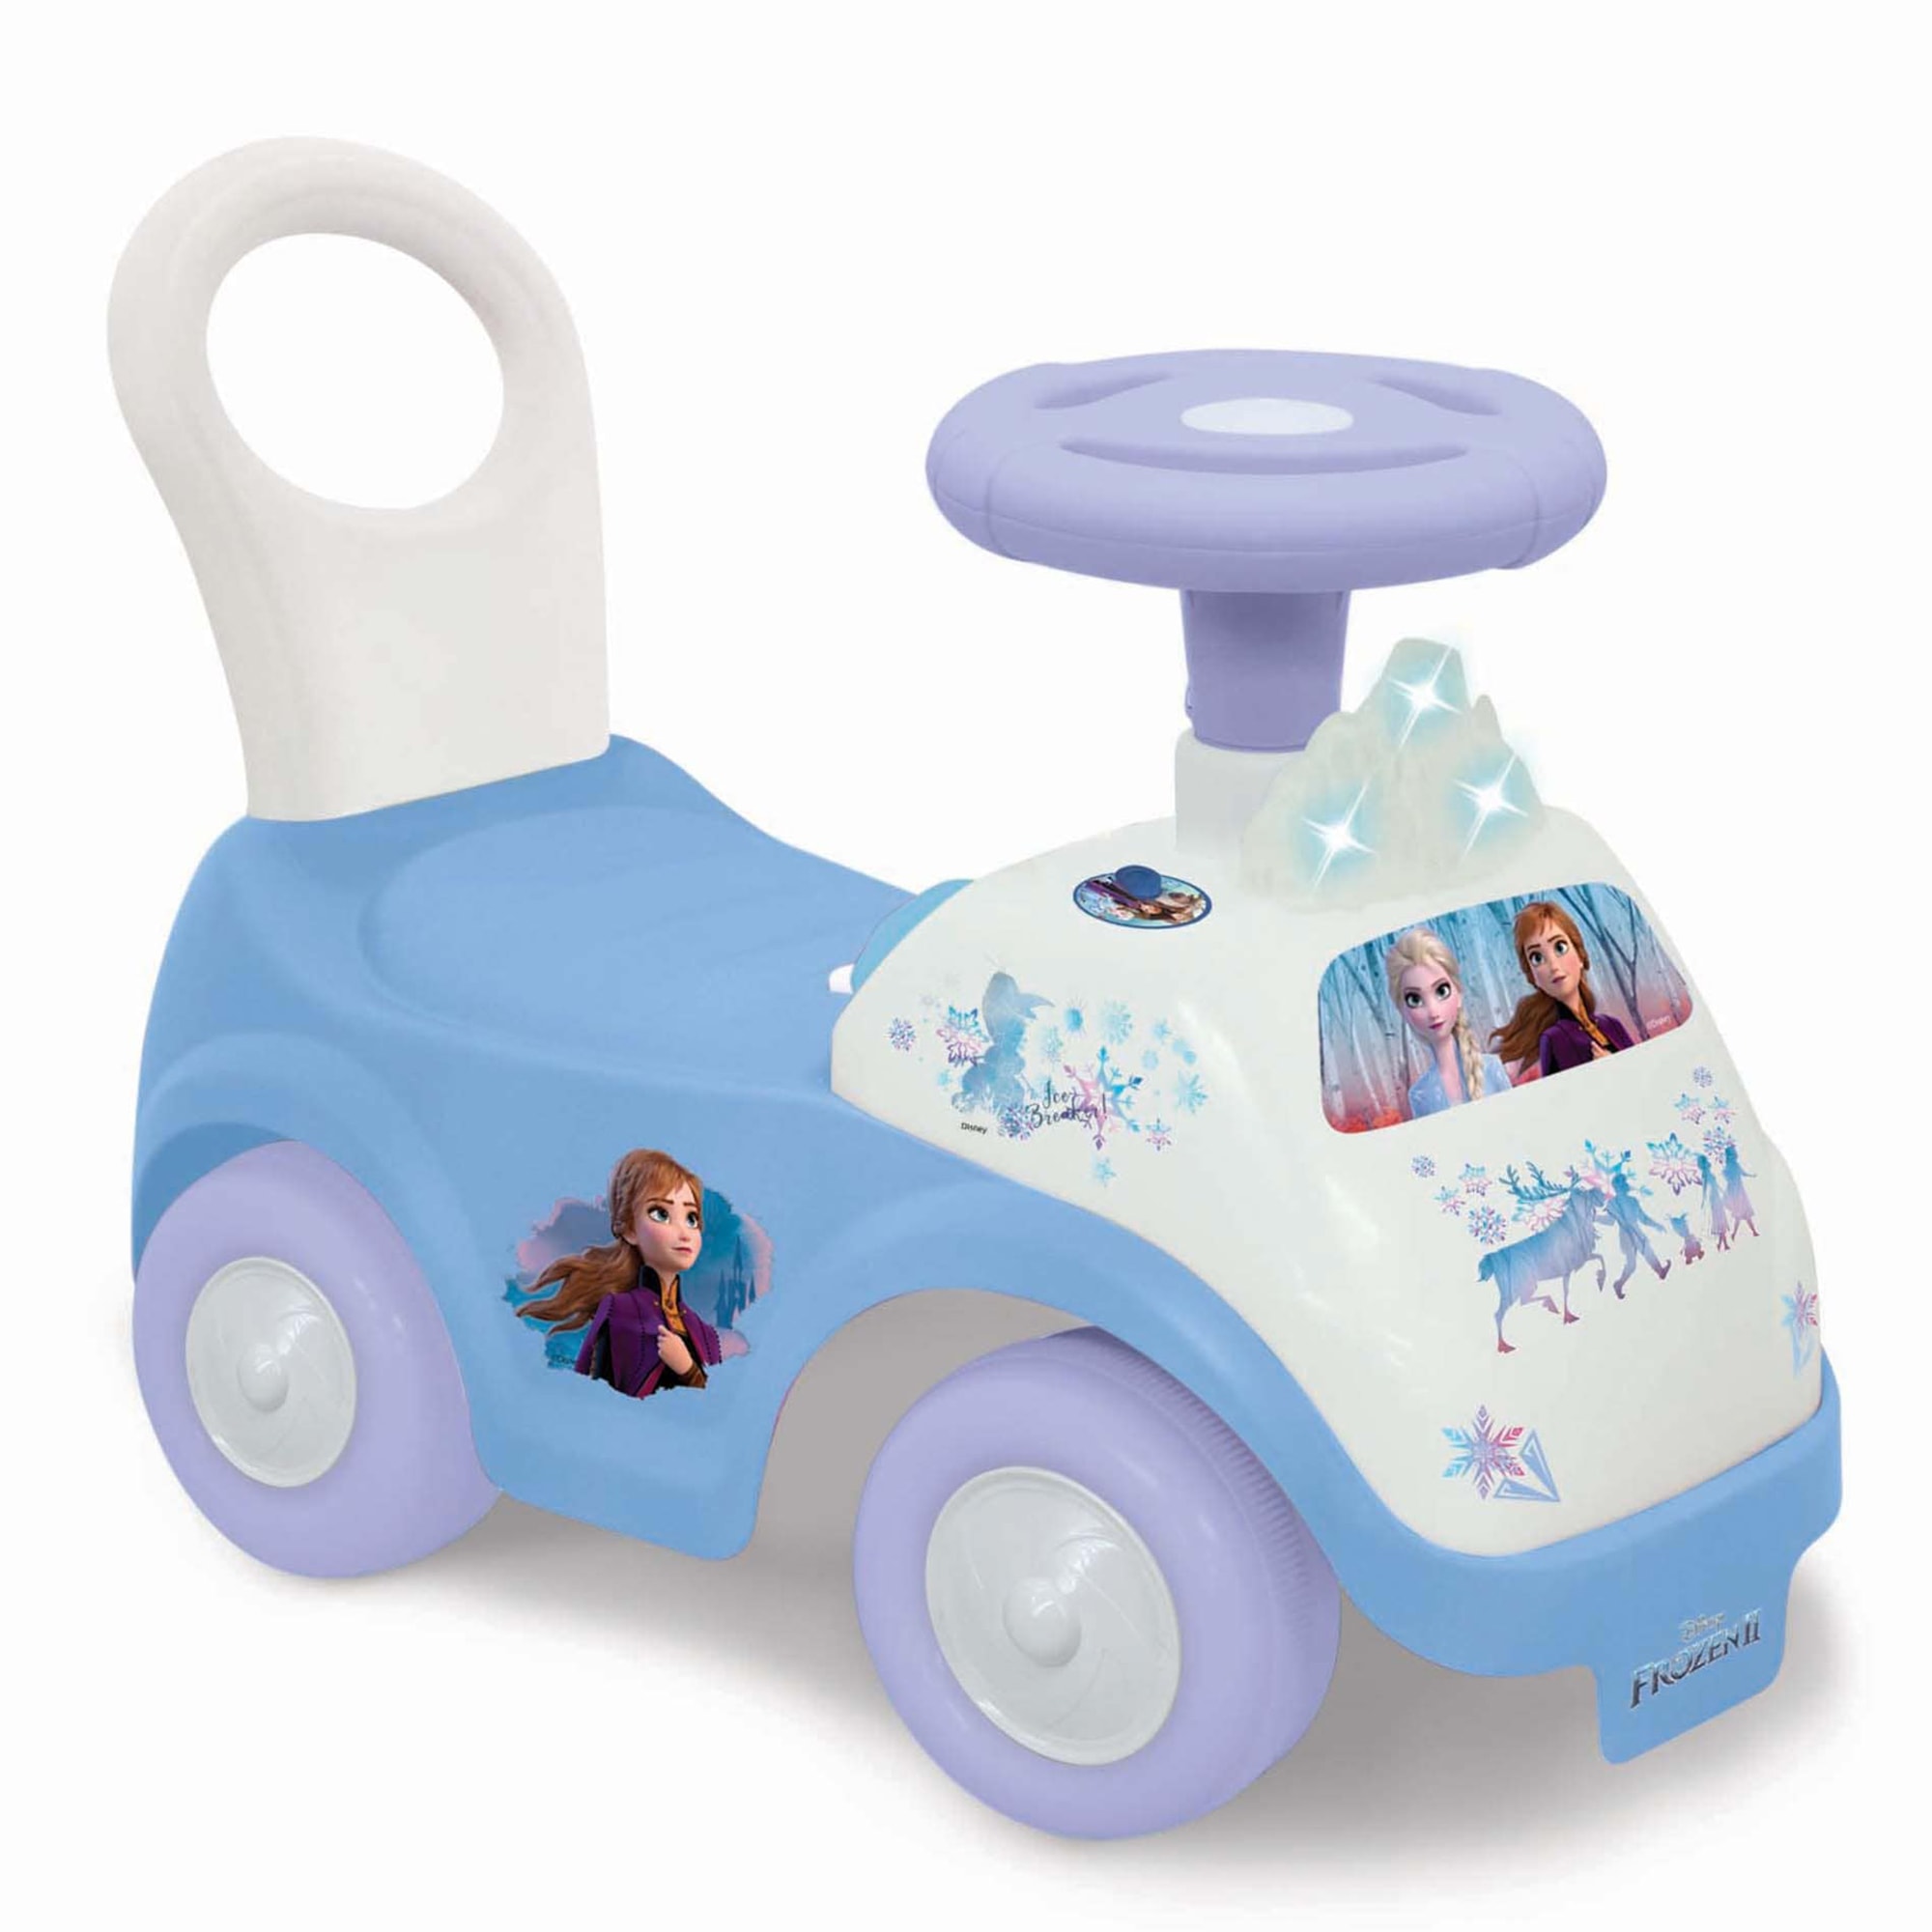 Disney: Frozen 2 Lights N' Sounds Ride-on, Toddlers 12-36 mos - image 1 of 5